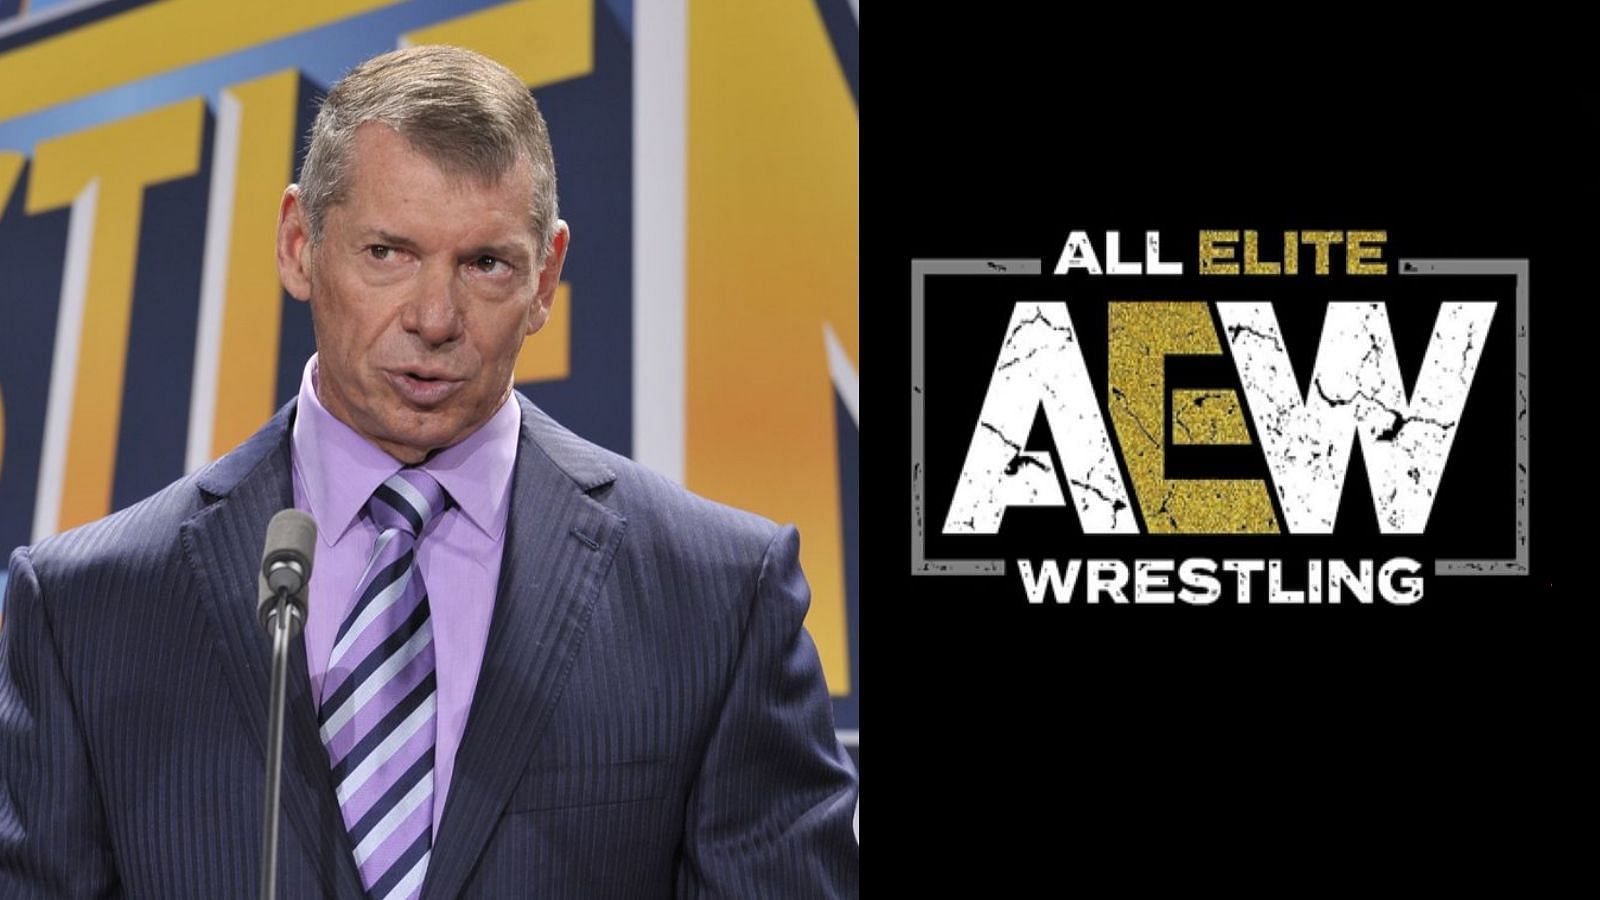 Could AEW become the biggest wrestling promotion?